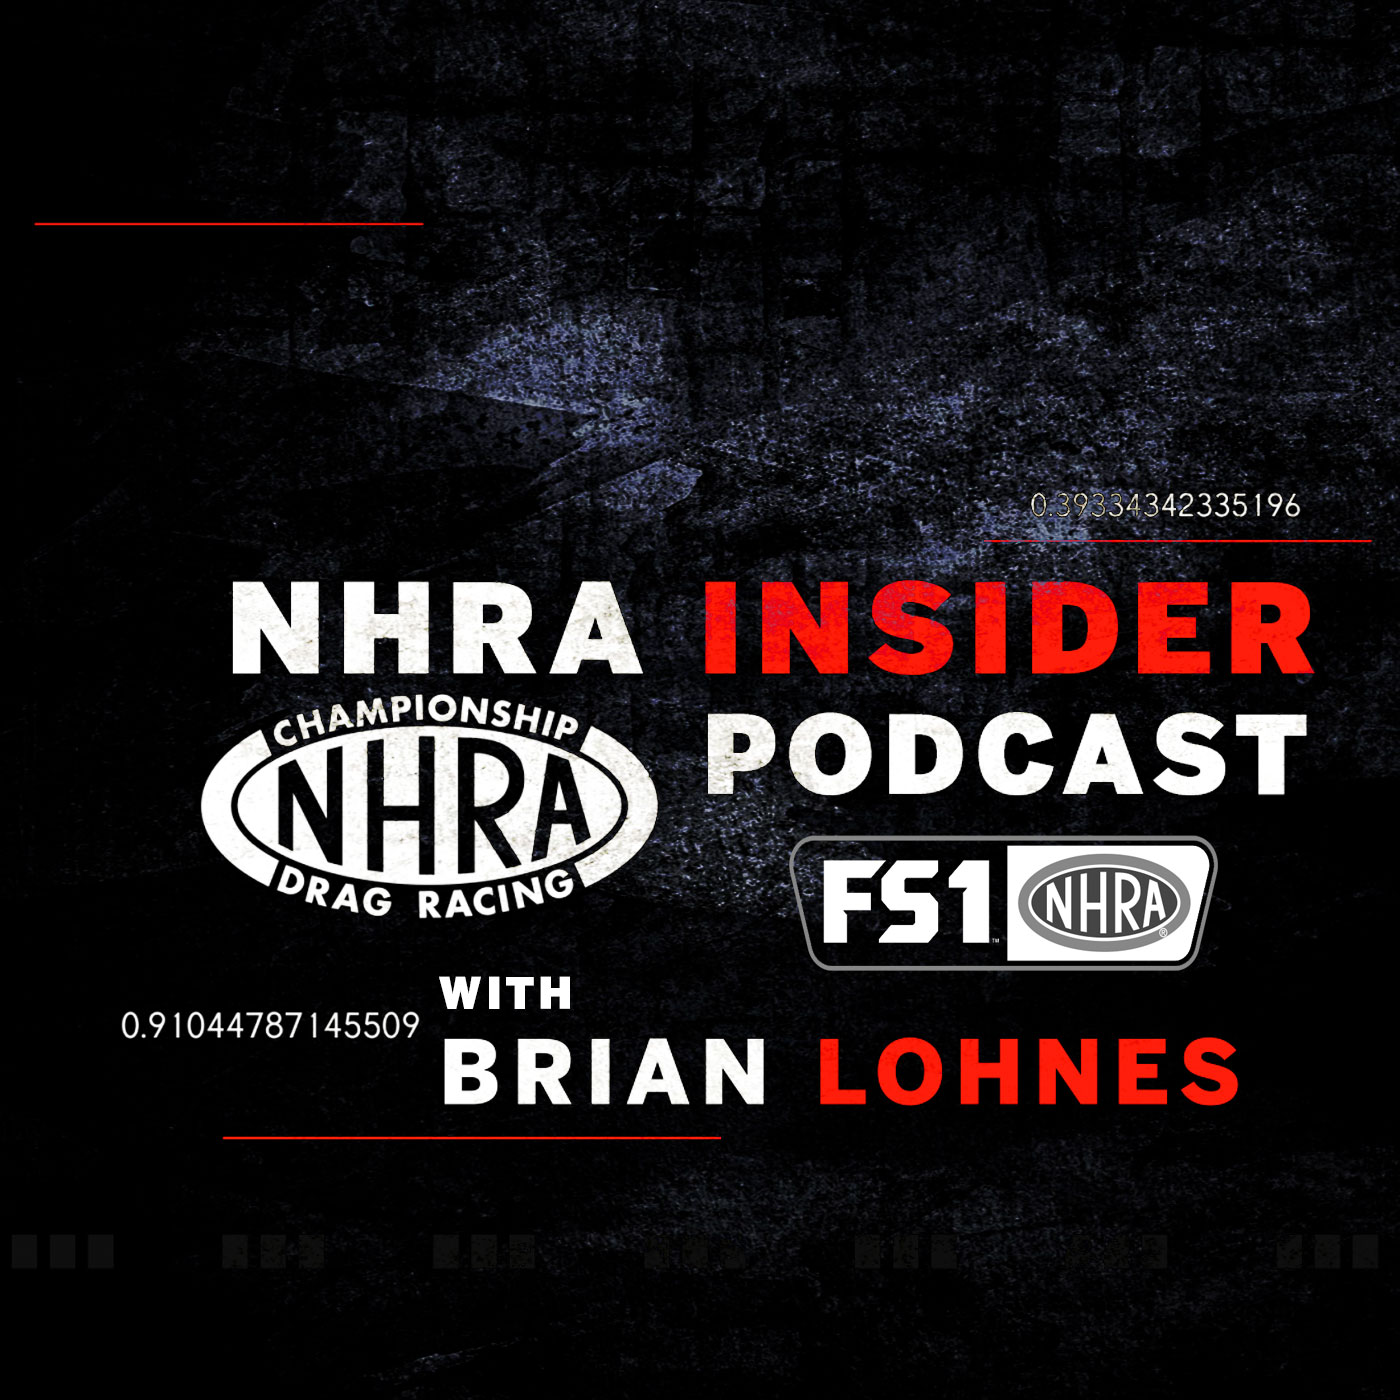 NHRA Insider Podcast: The Business of Speed – Cruz Pedregon and Justin Ashley Talk About Their Off Season Hustle